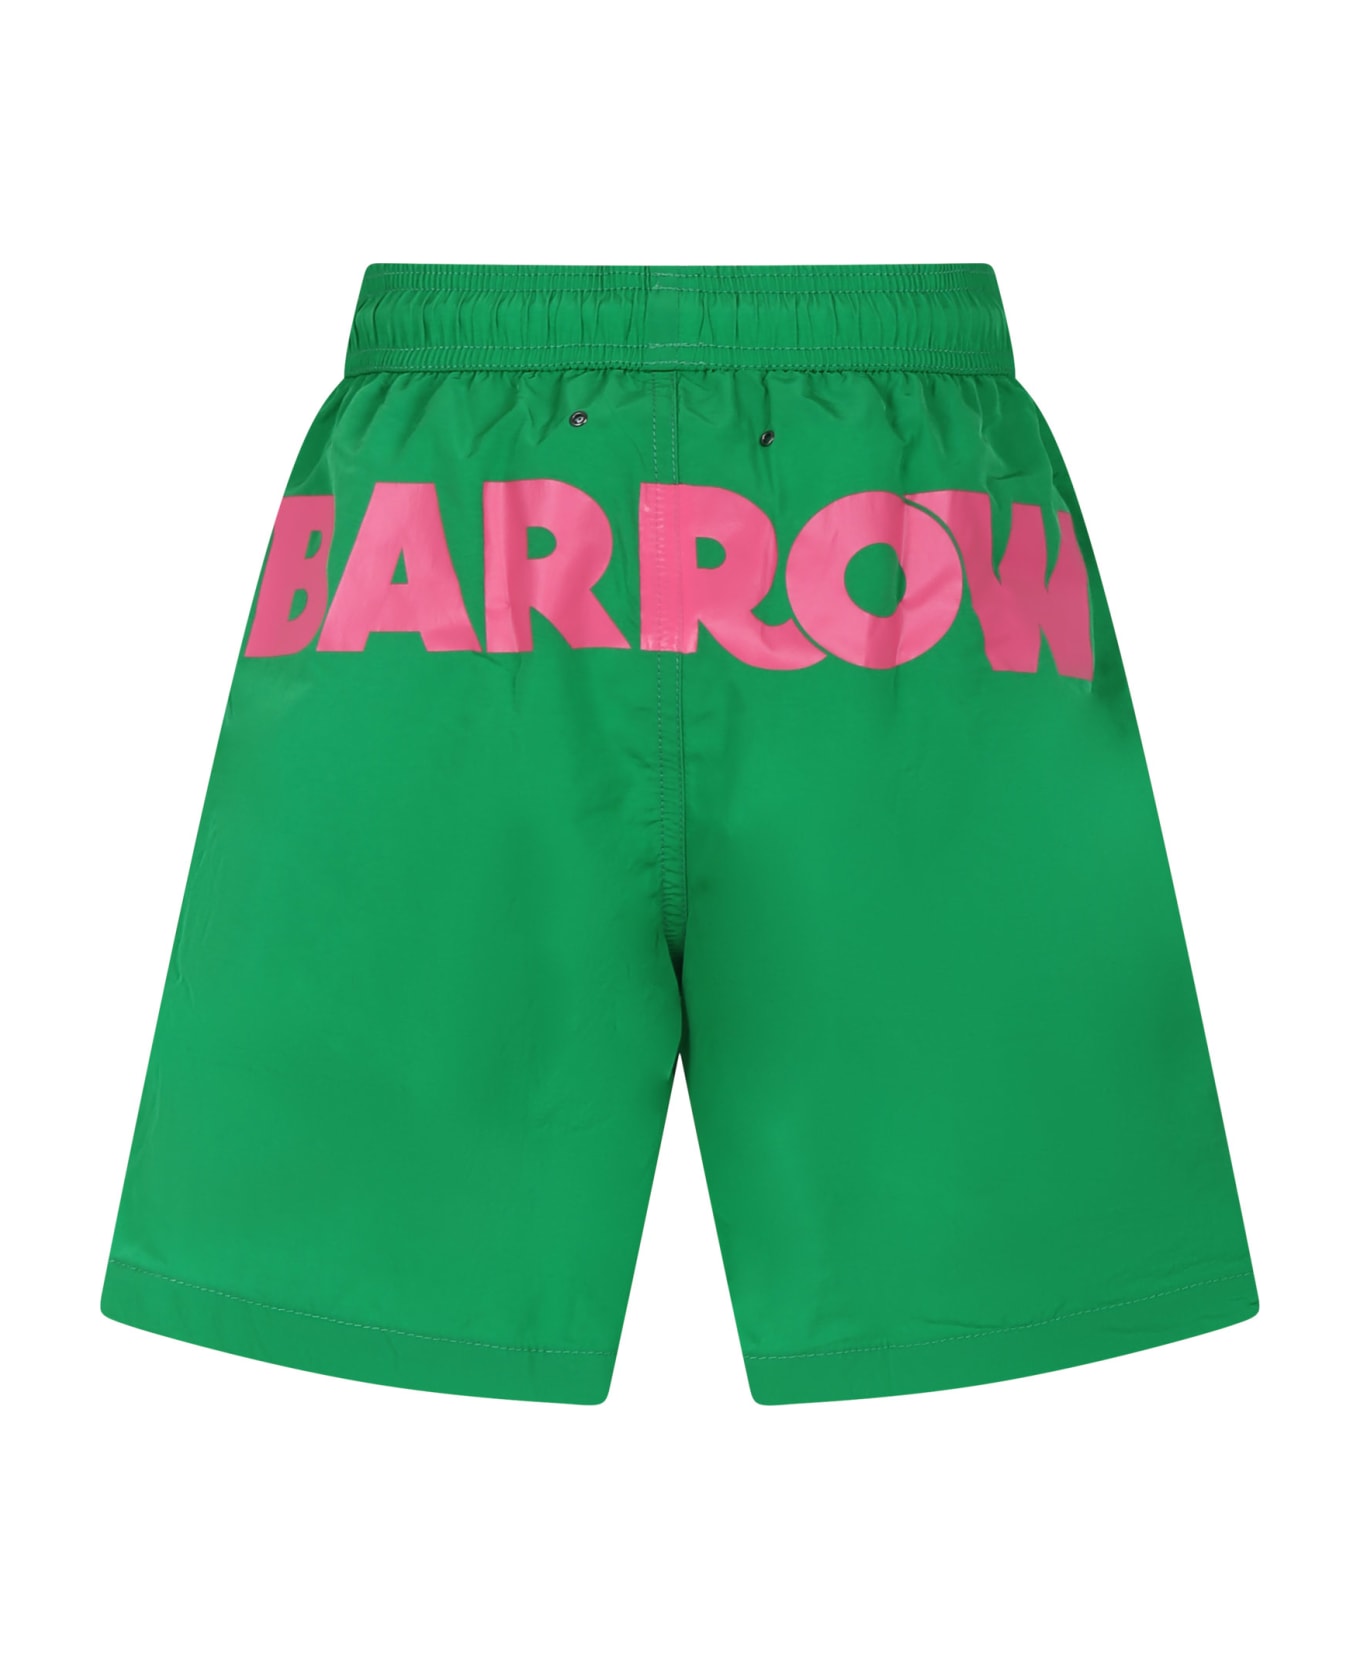 Barrow Green Swim Shorts For Boy With Smiley - Green